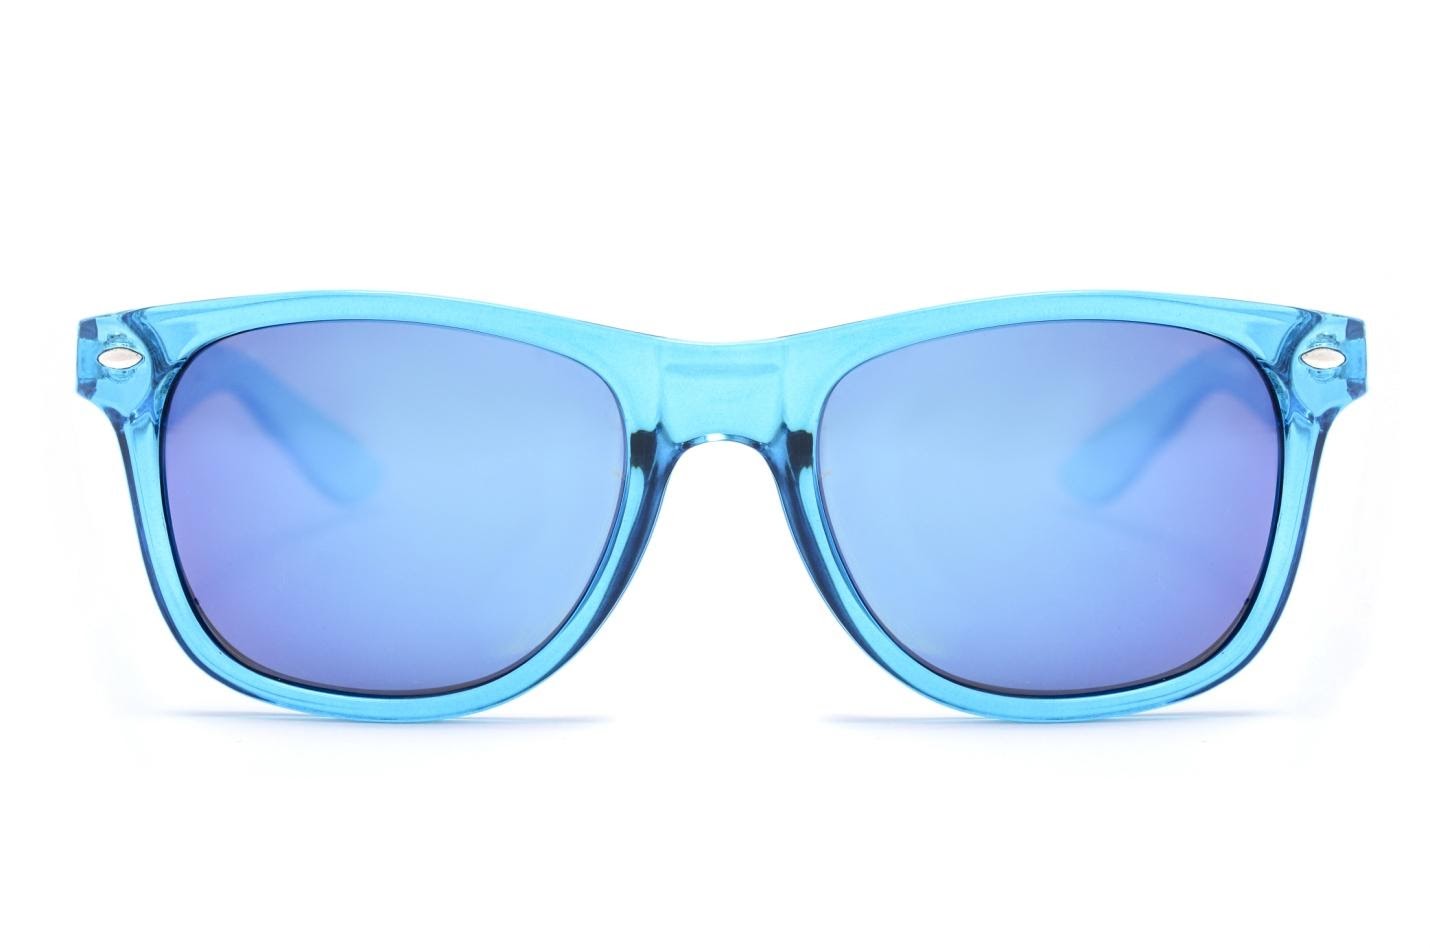 Guide to Buying the Best Bluetooth Sunglasses